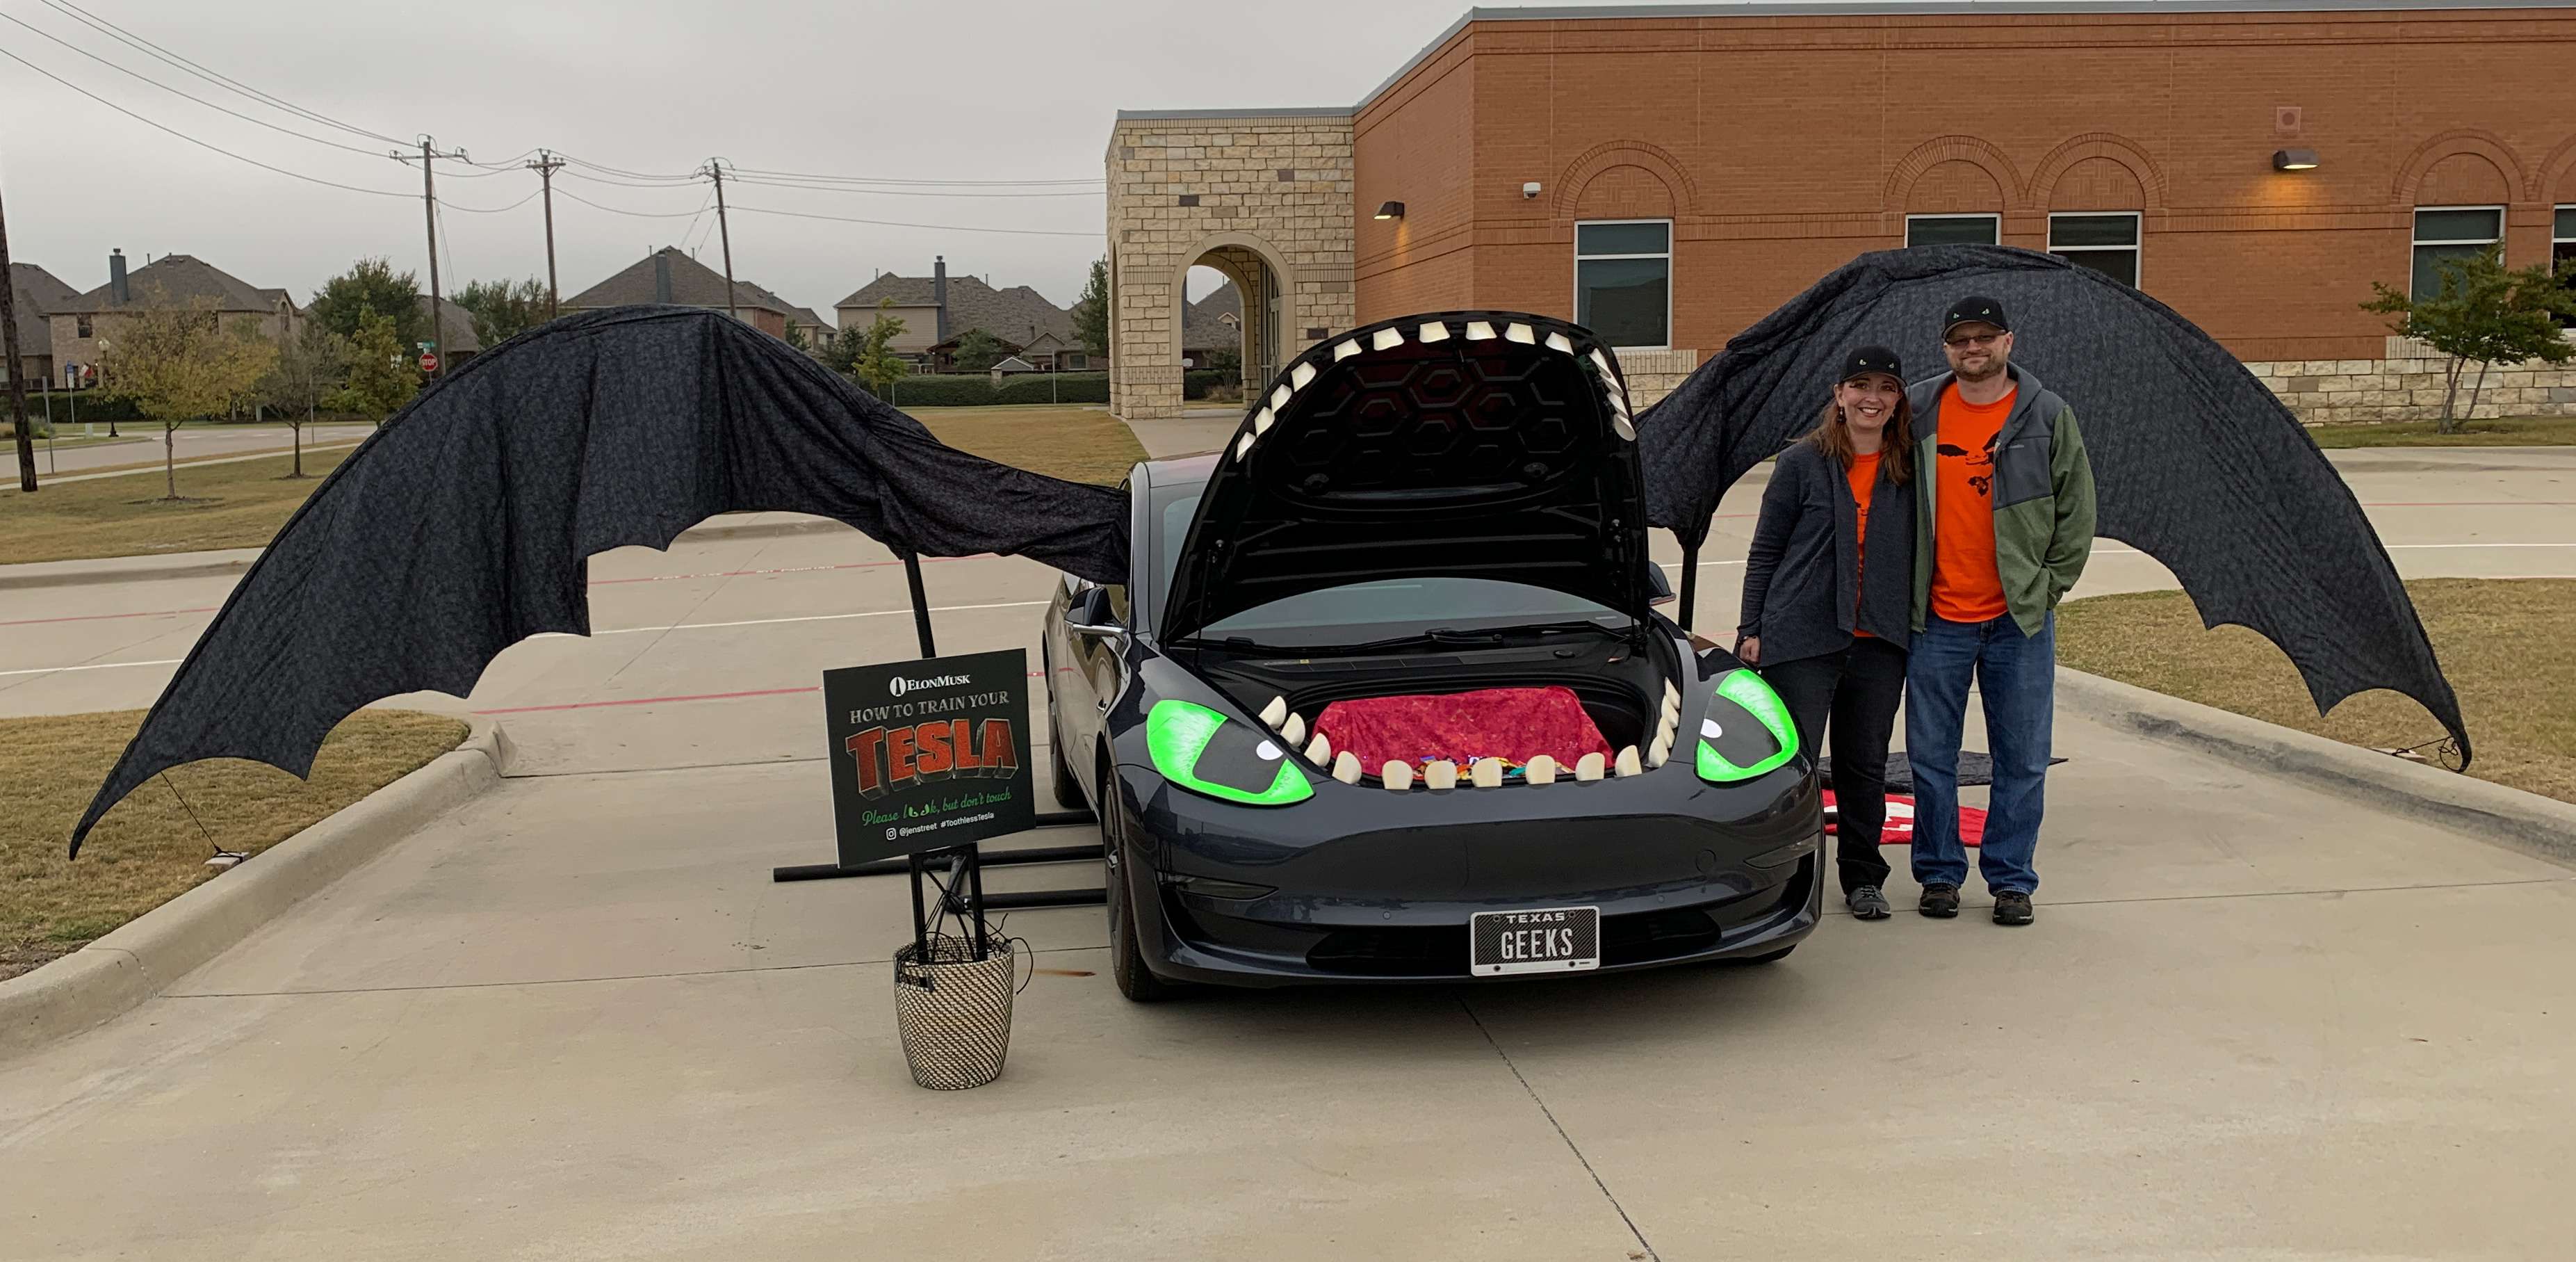 The daytime look of Toothless the Tesla.